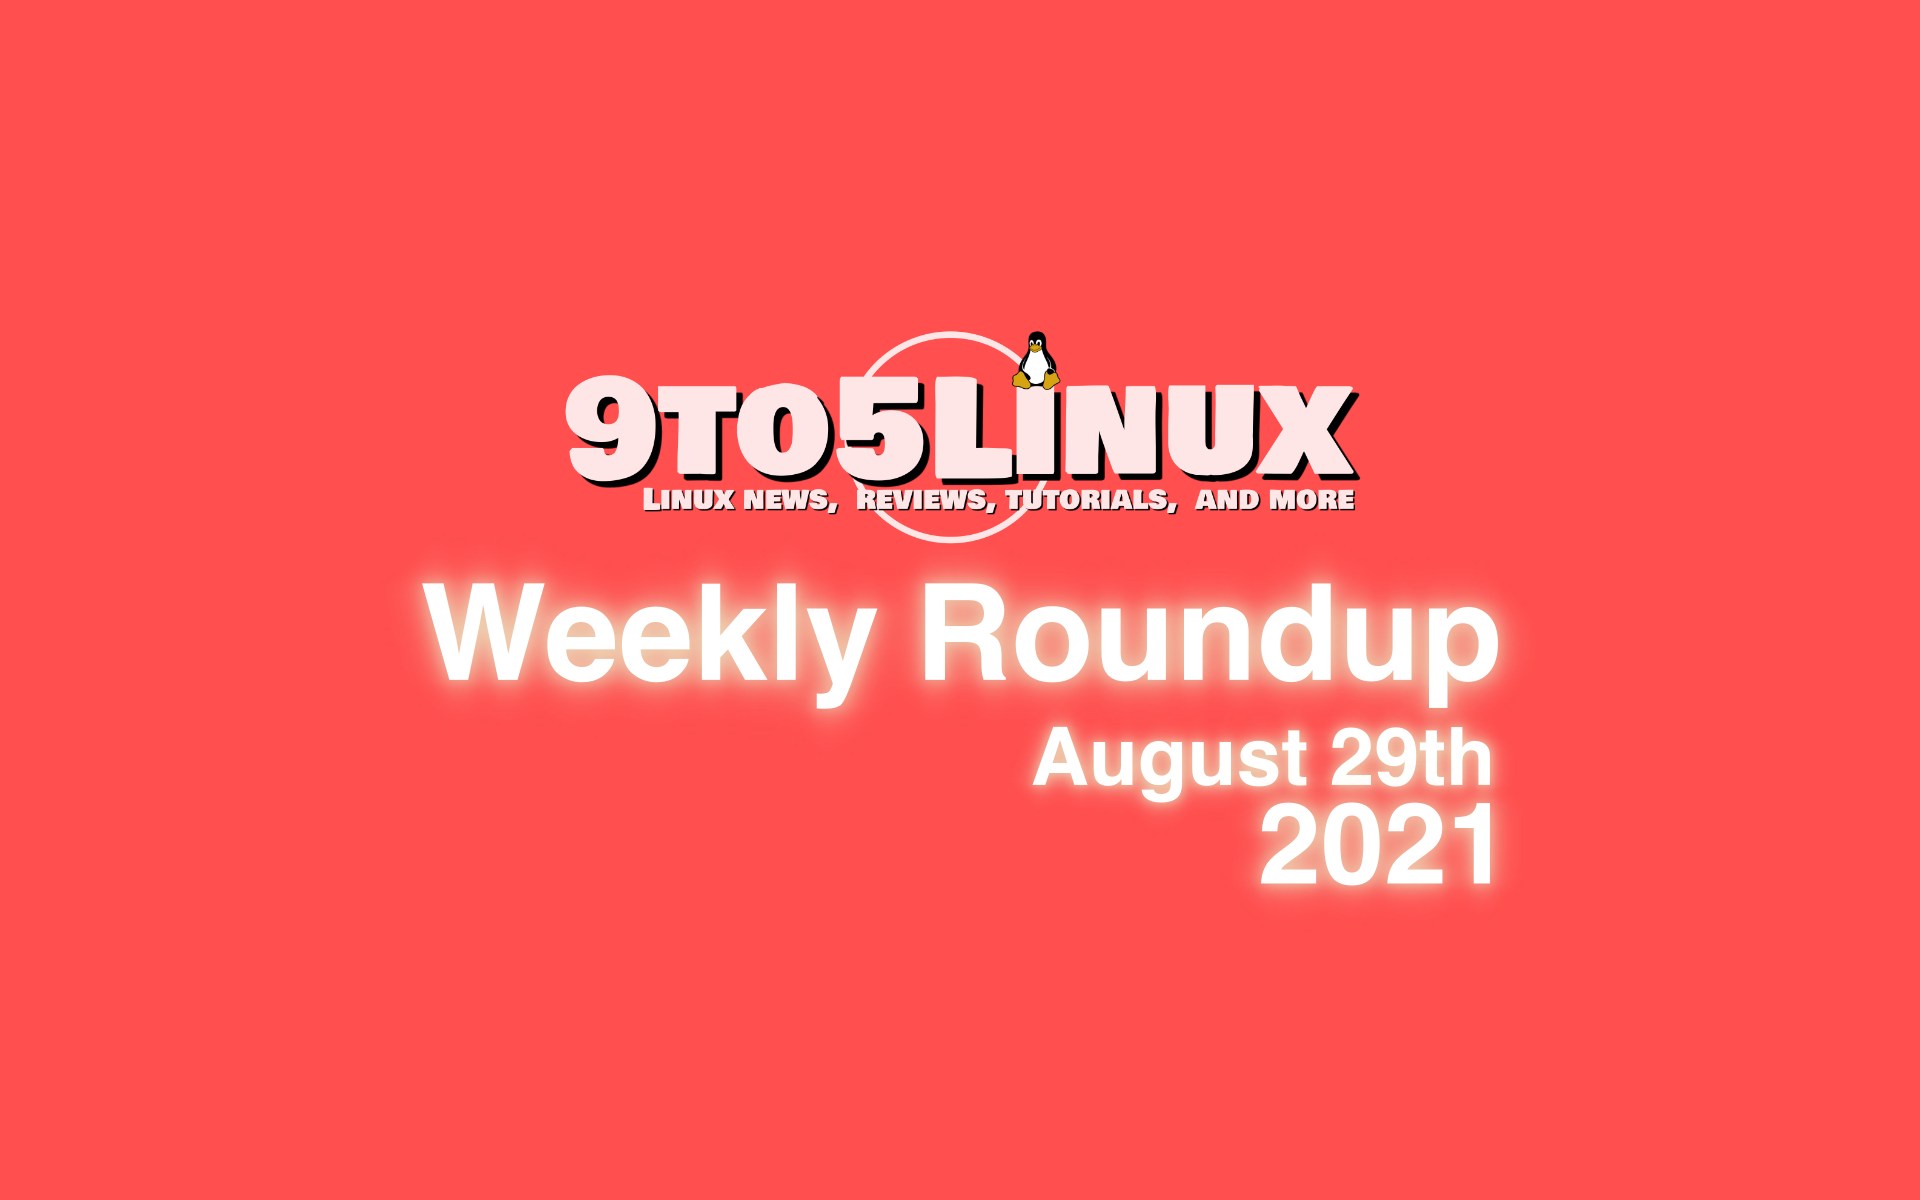 9to5Linux Weekly Roundup: August 29th, 2021